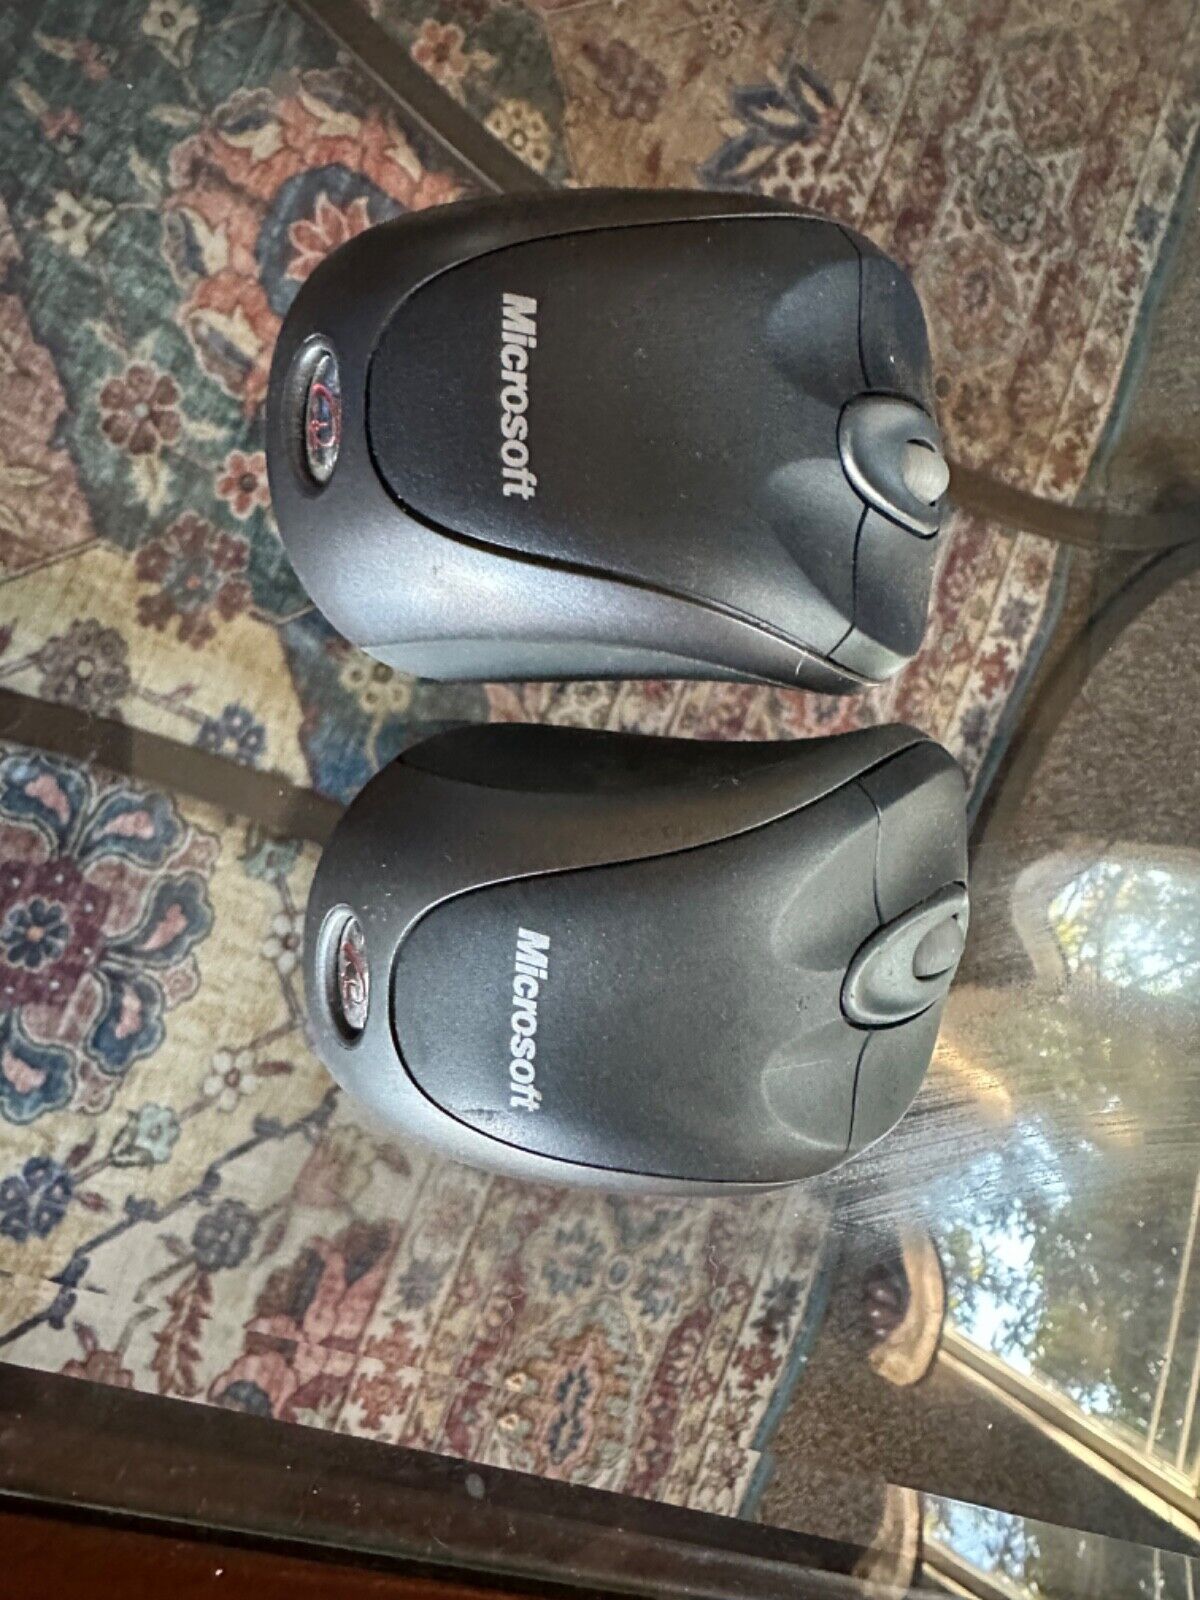 Microsoft Wireless  Optical Mouse Tested And Works: Lot of 2